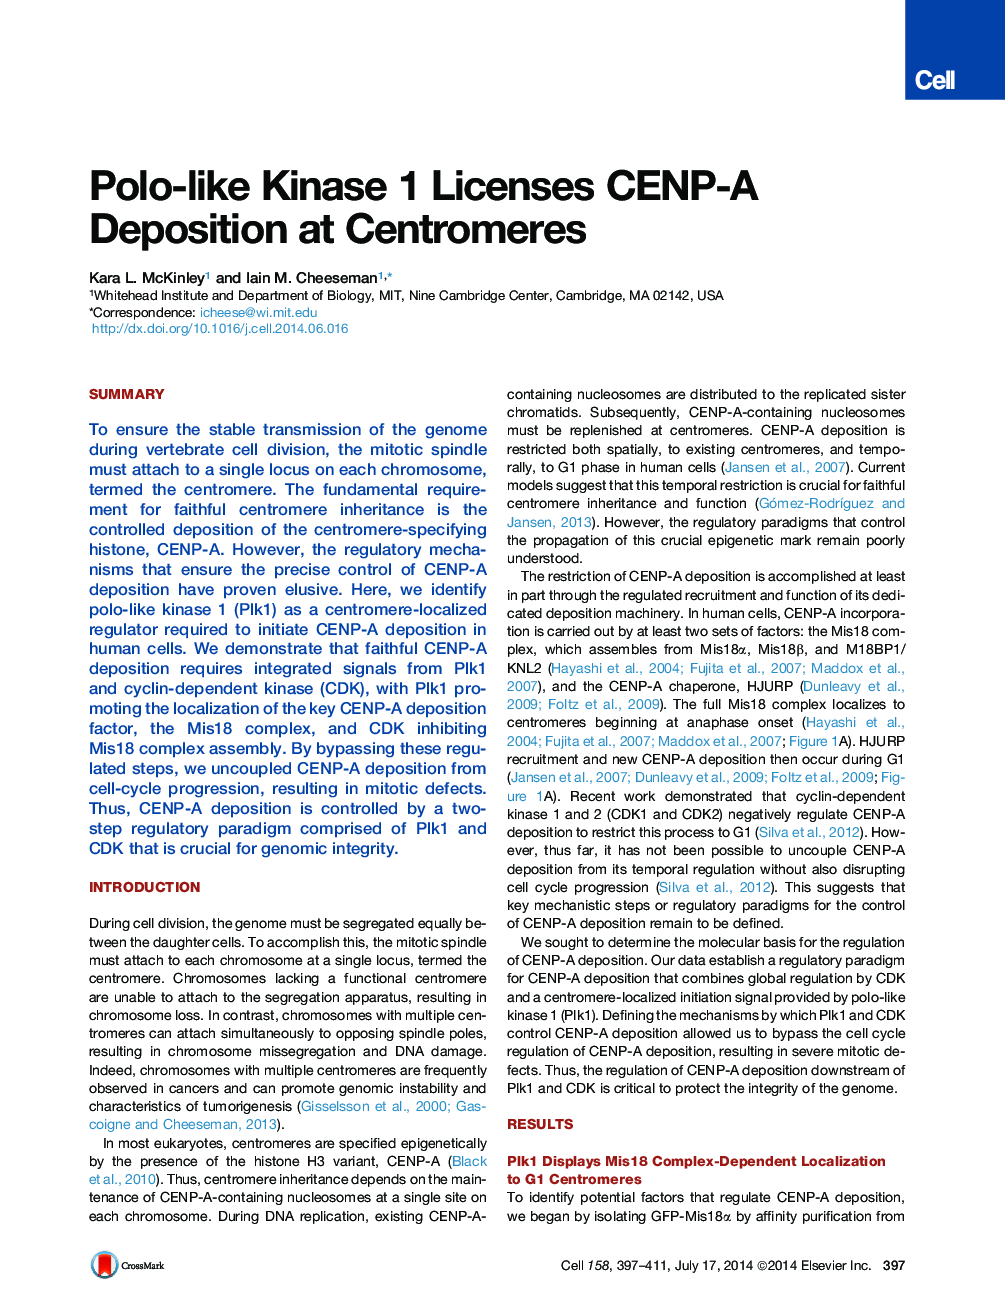 Polo-like Kinase 1 Licenses CENP-A Deposition at Centromeres